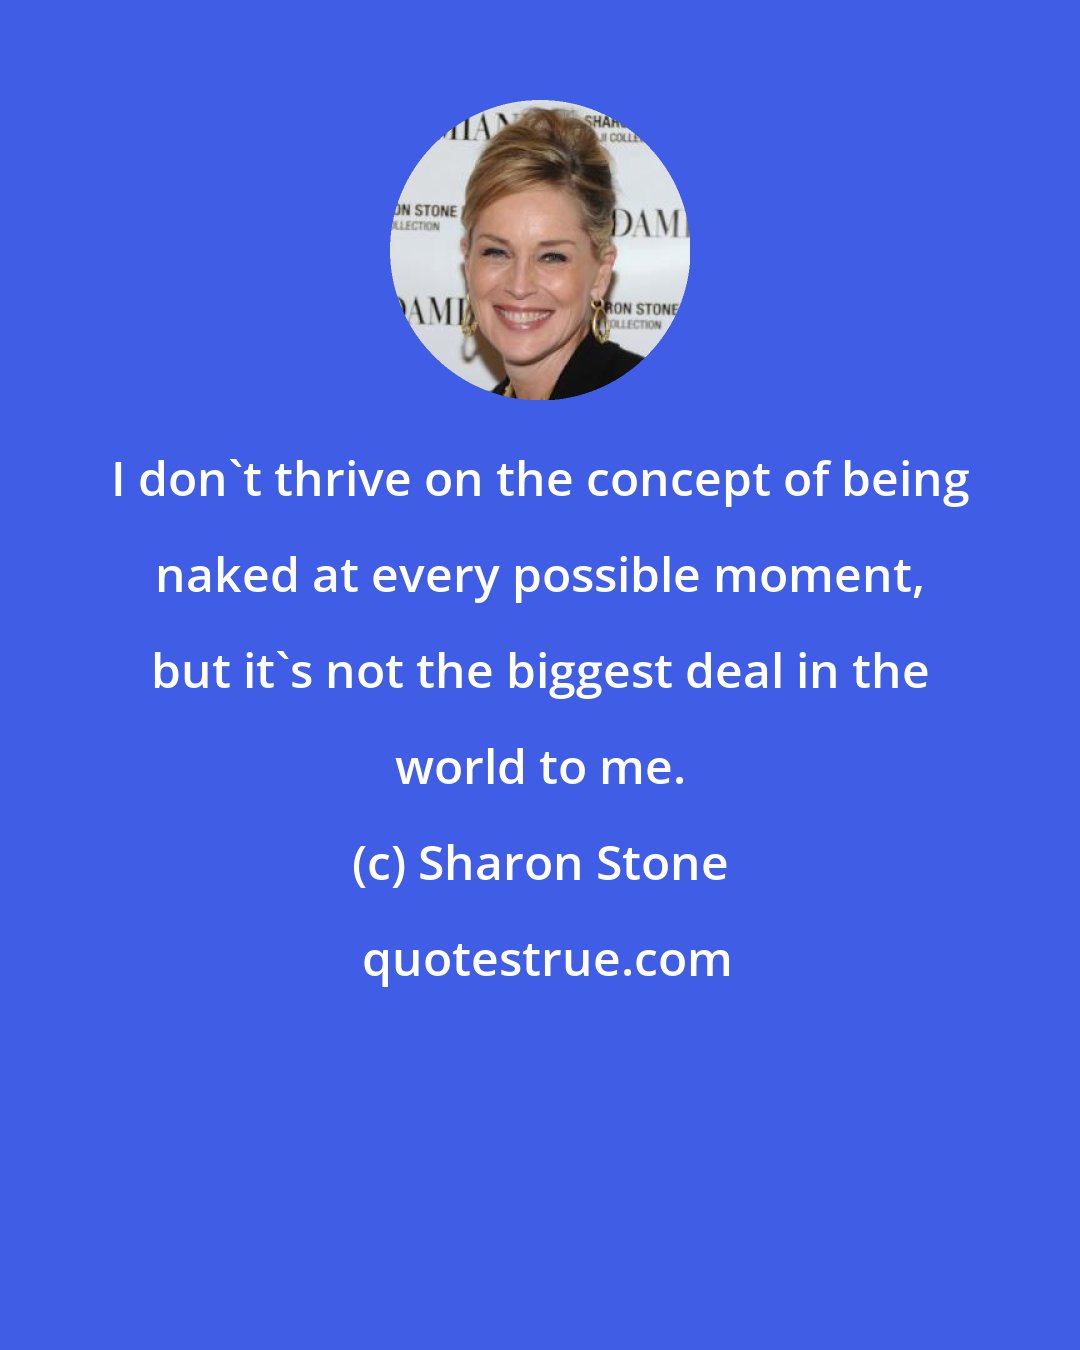 Sharon Stone: I don't thrive on the concept of being naked at every possible moment, but it's not the biggest deal in the world to me.